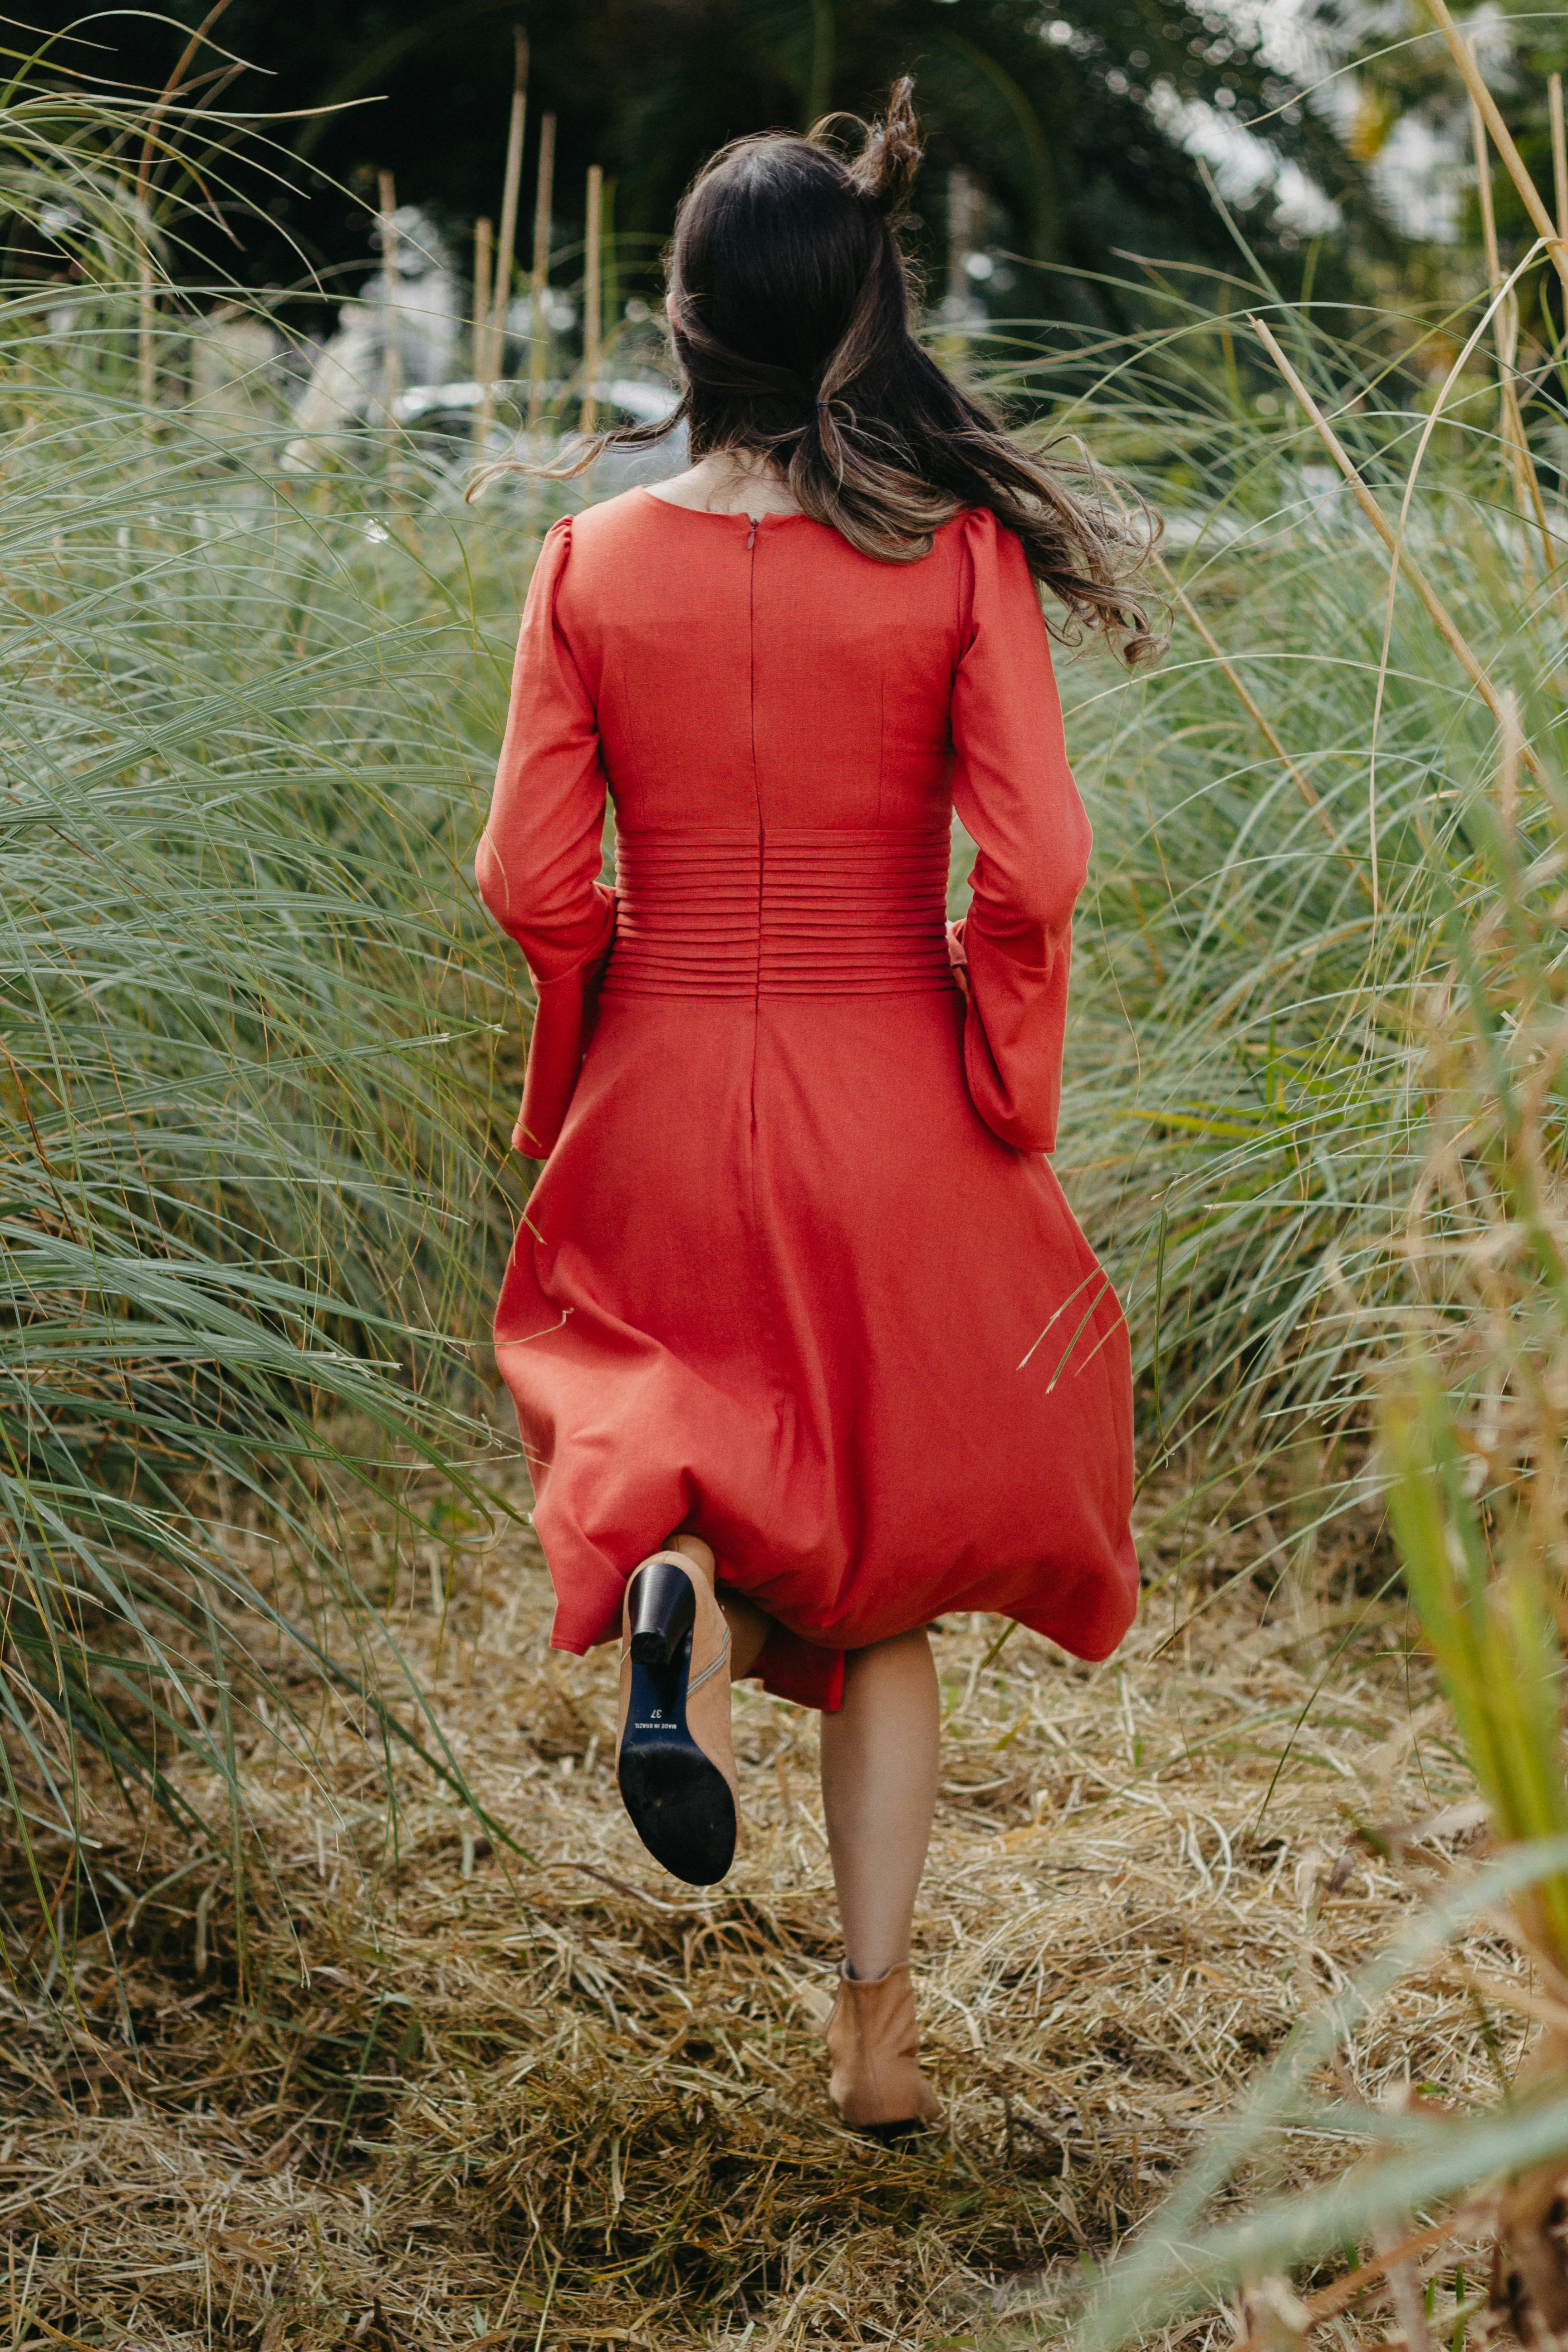 woman in red dress running